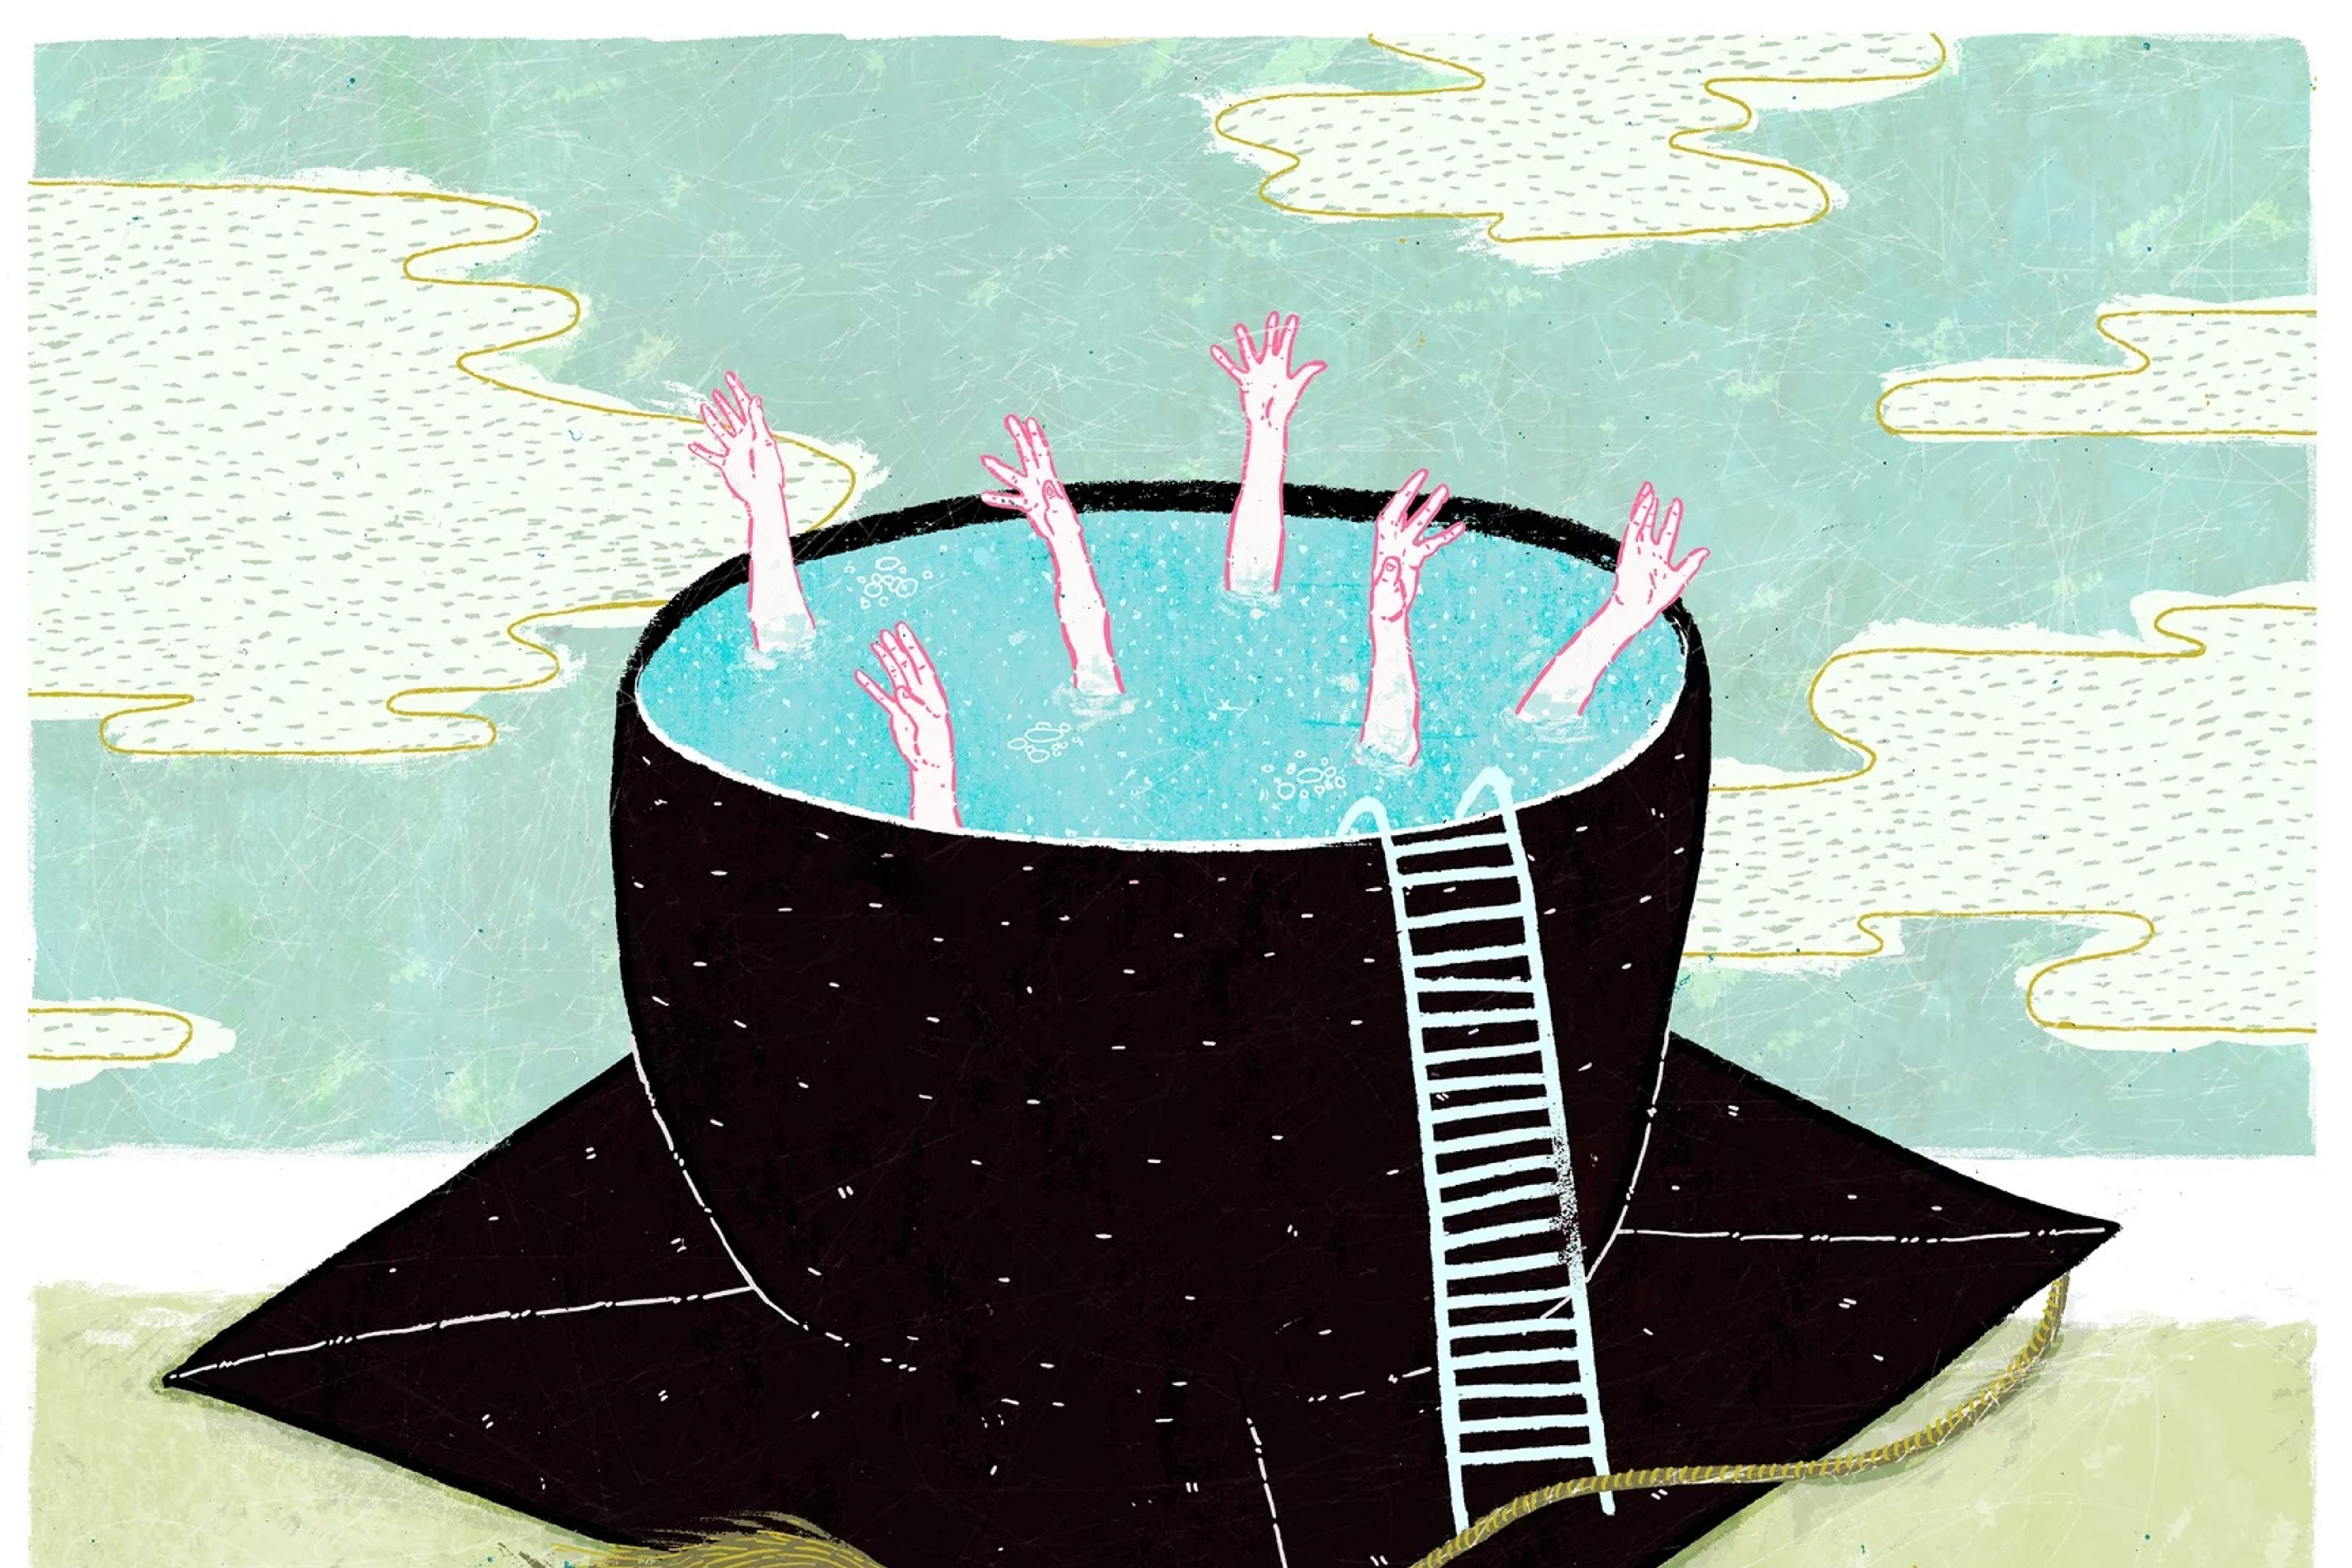 An illustration depicting college graduates drowning in a mortarboard cap full of water.